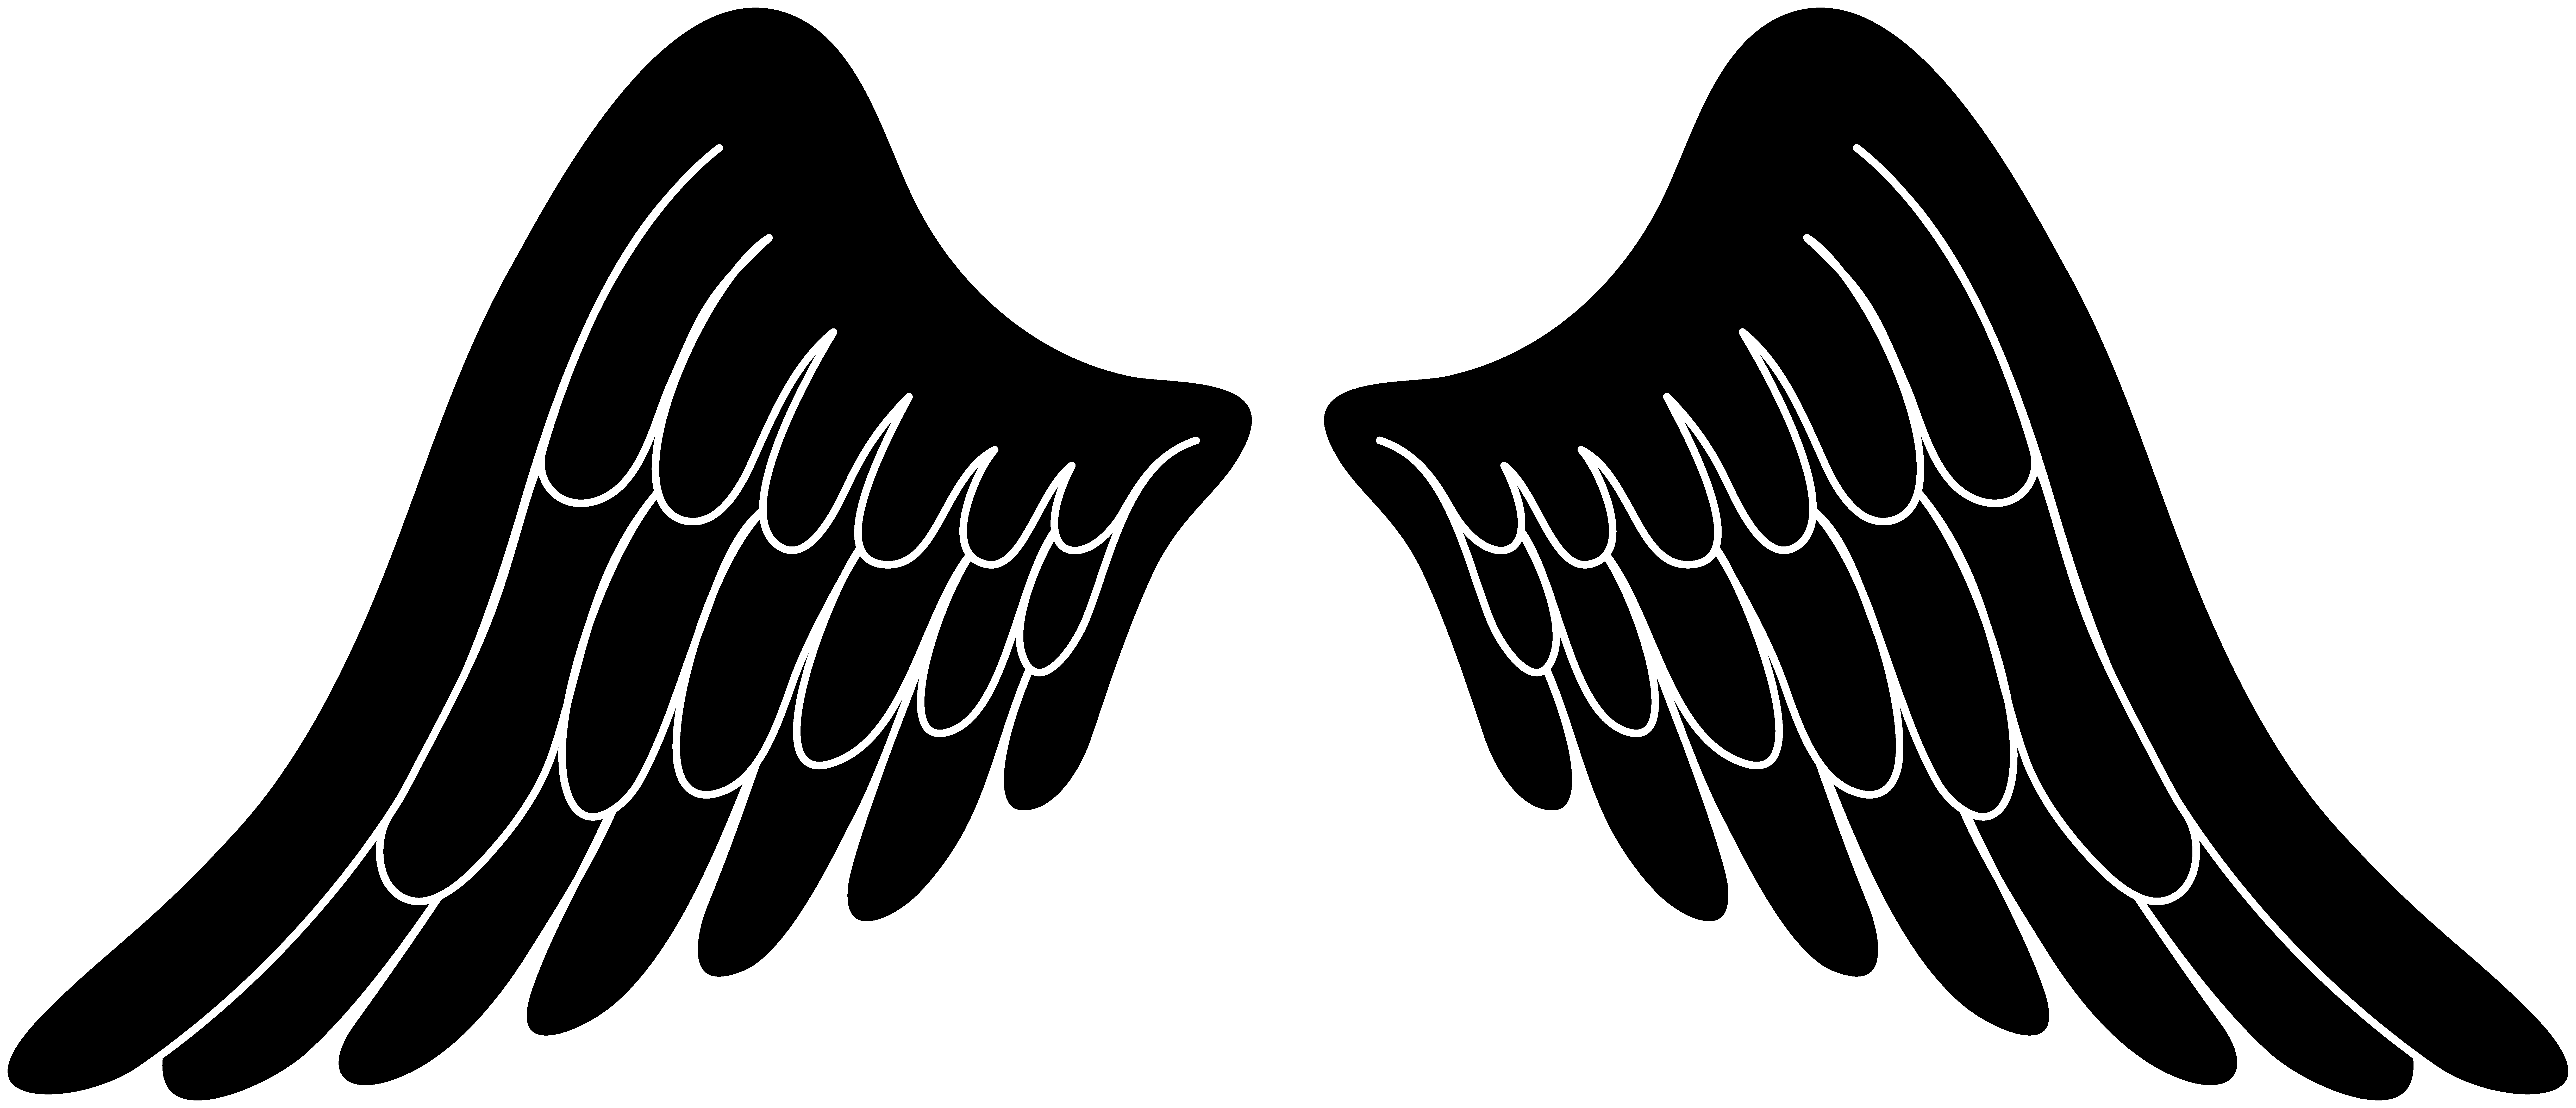 Free Pictures Of Angels With Wings - Cliparts.co